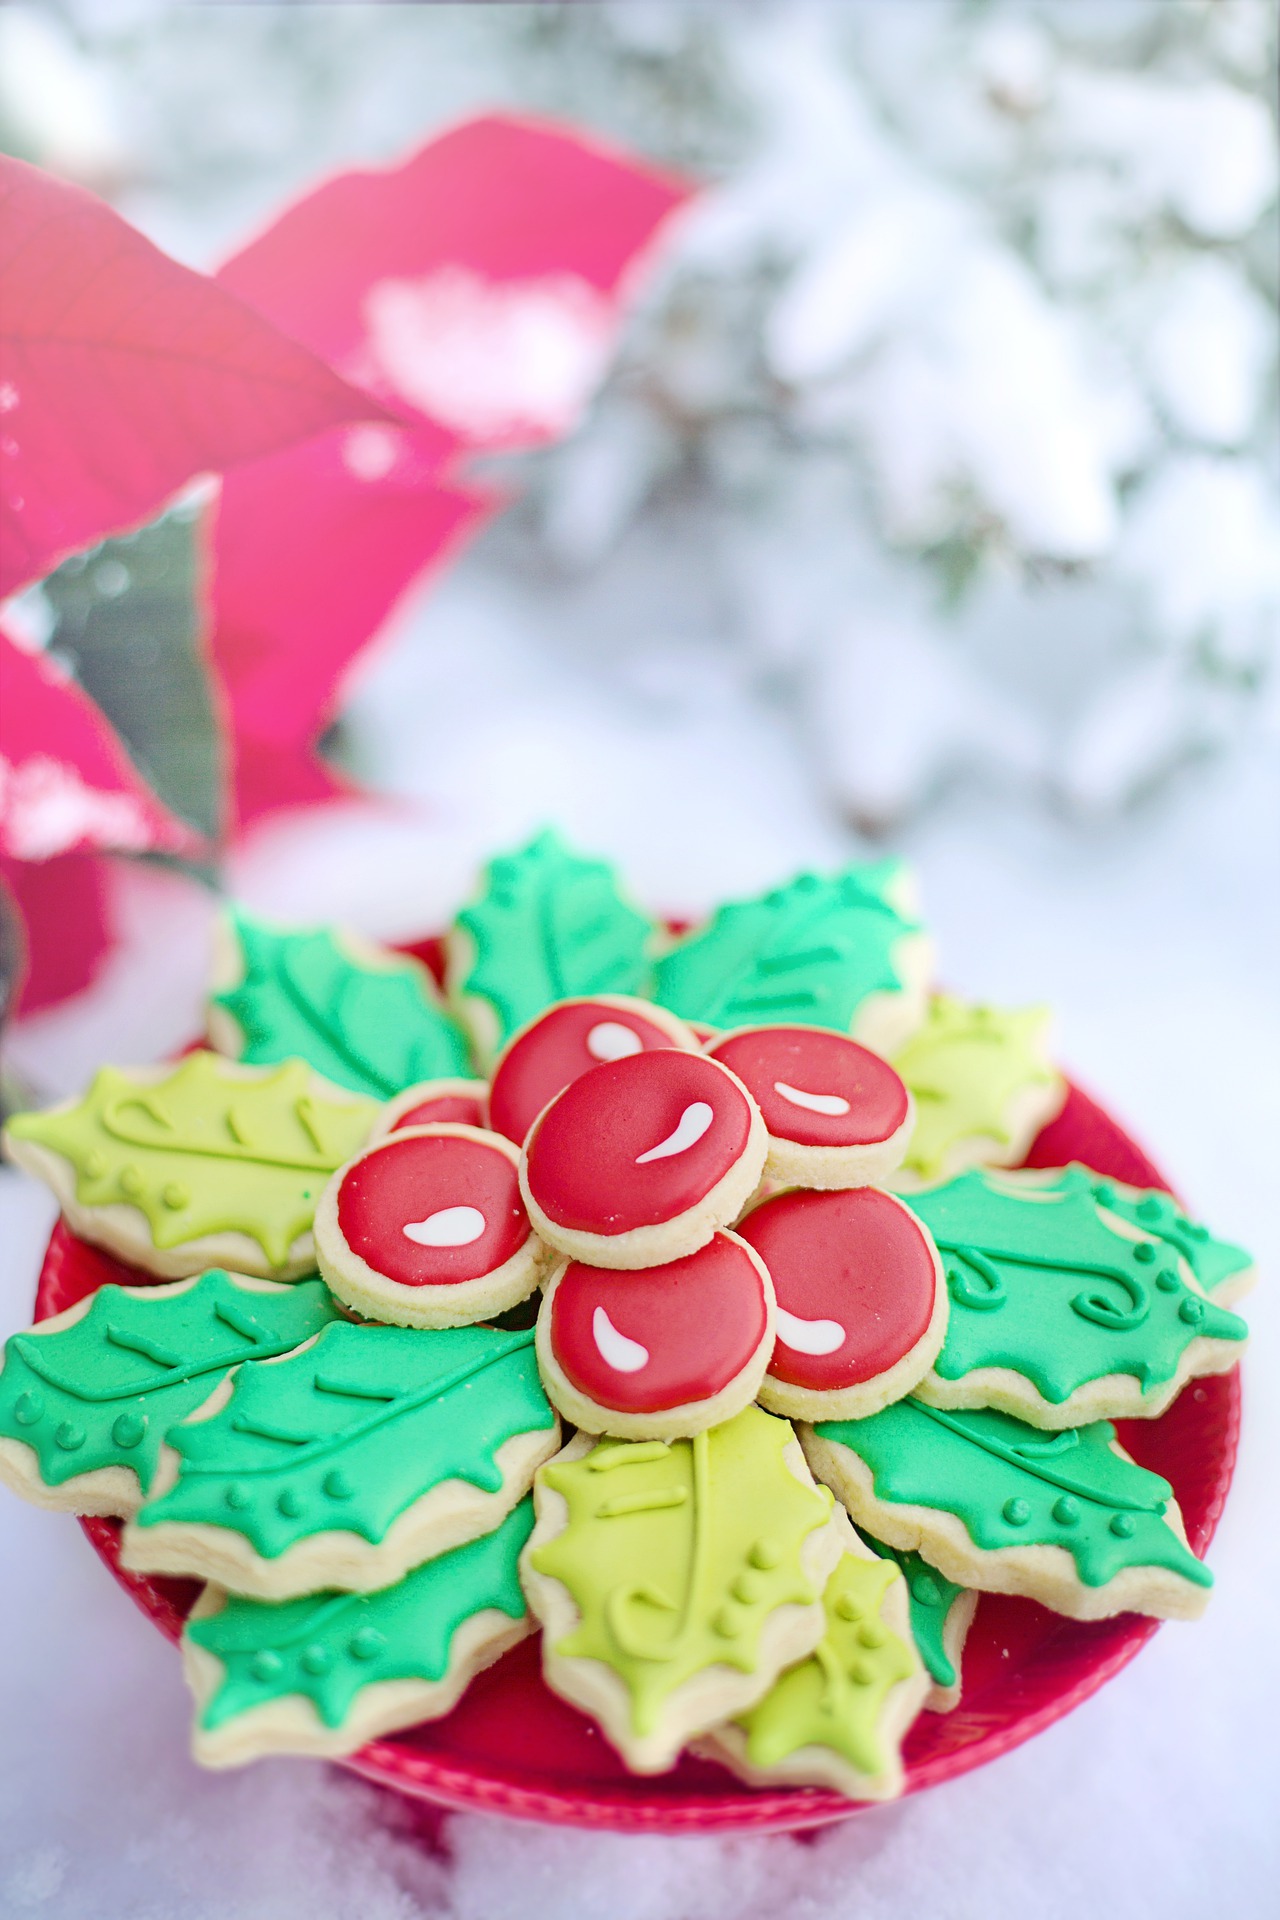 Image by Jill Wellington from Pixabay Christmascookies